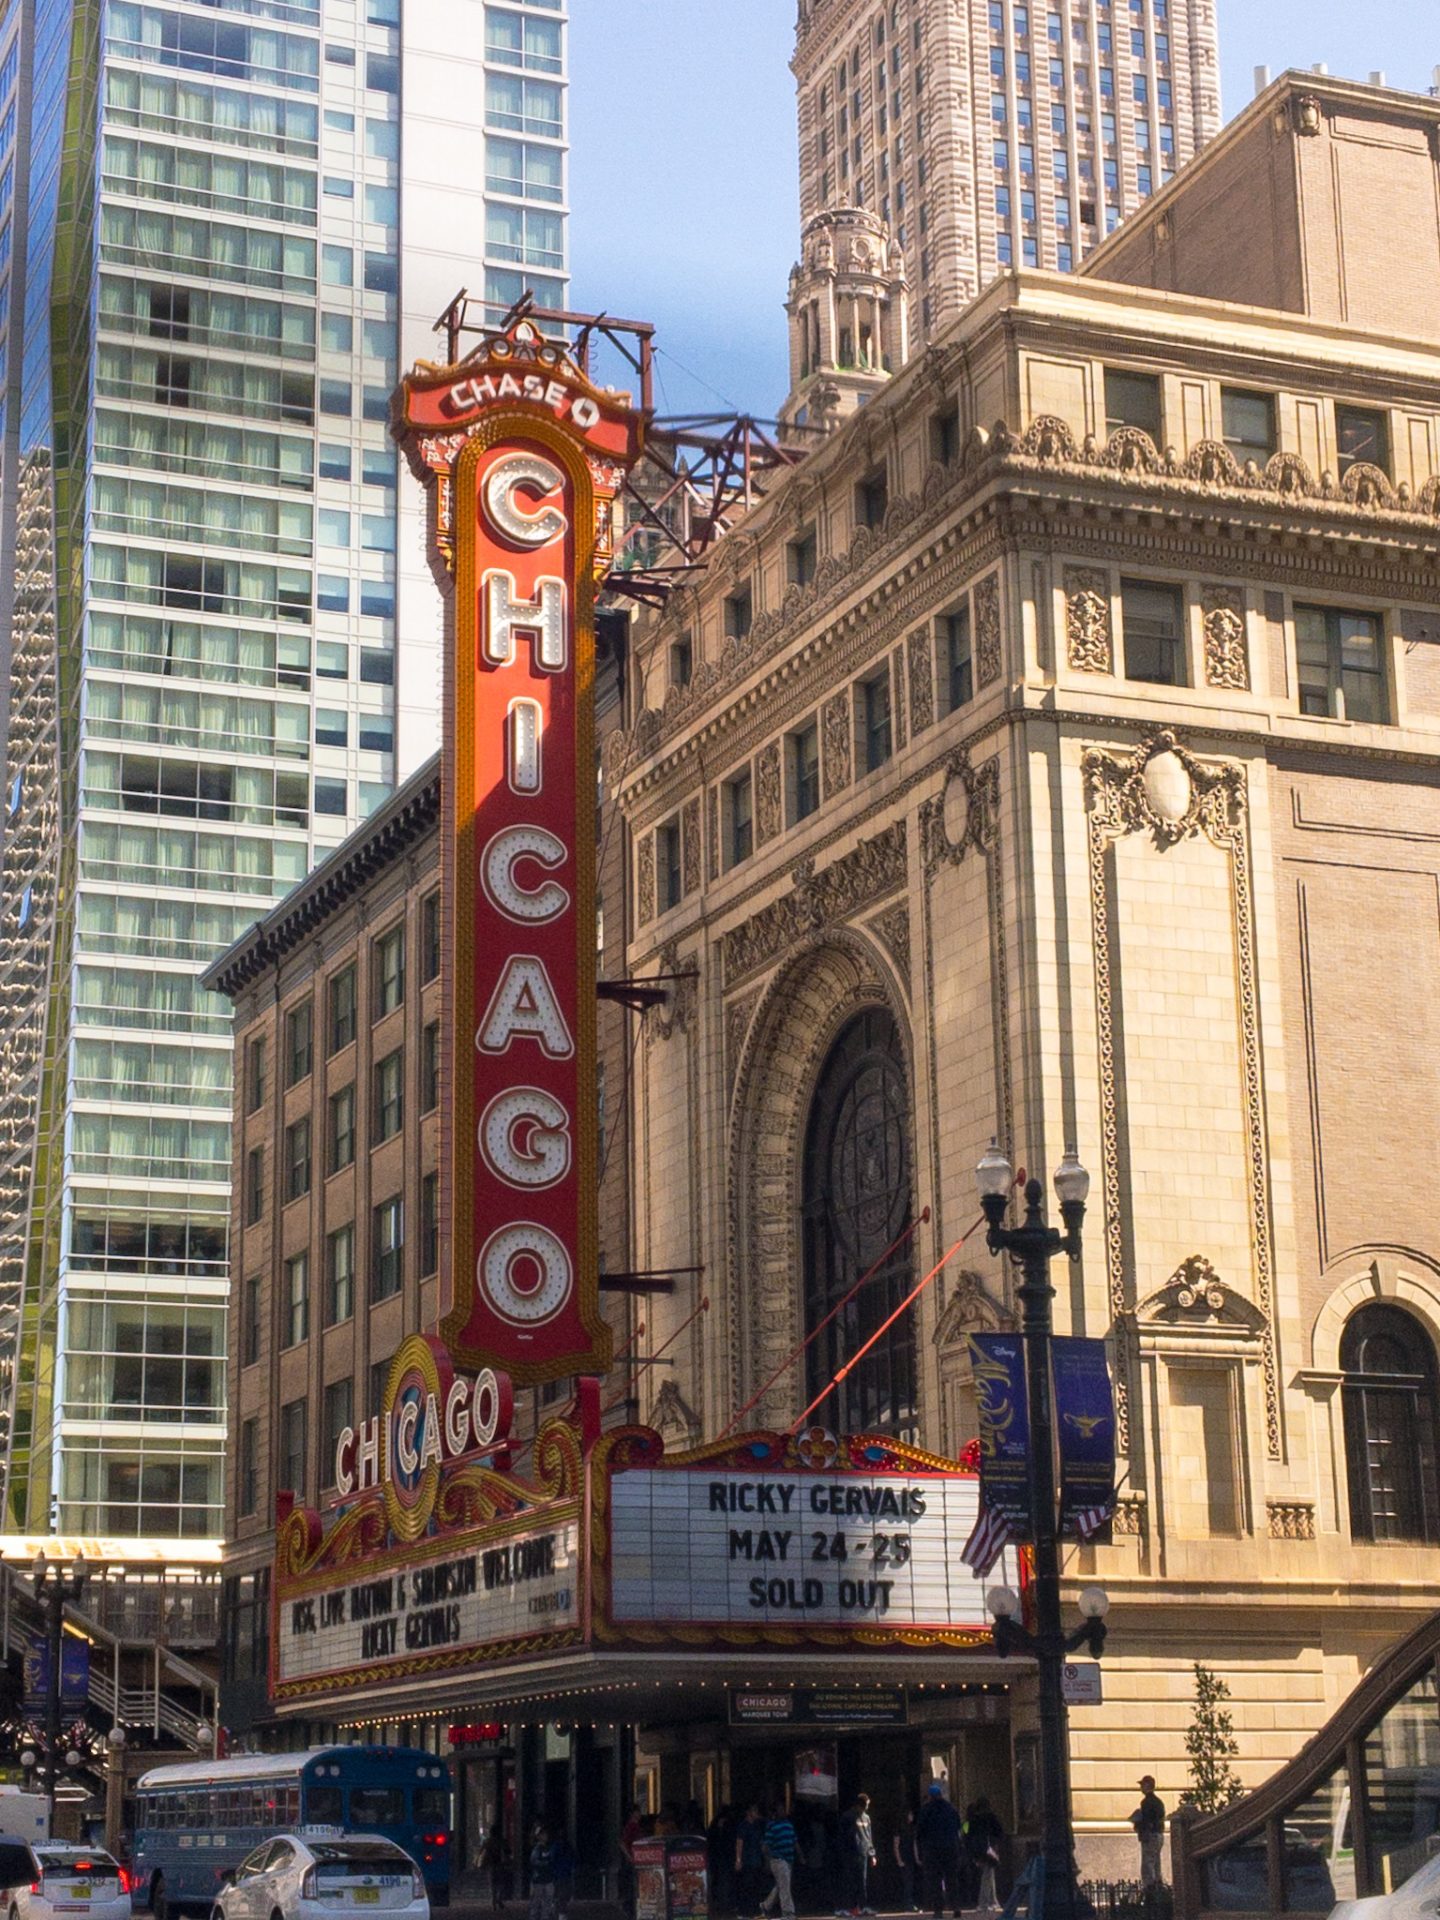 Some of my favorite things about…Chicago